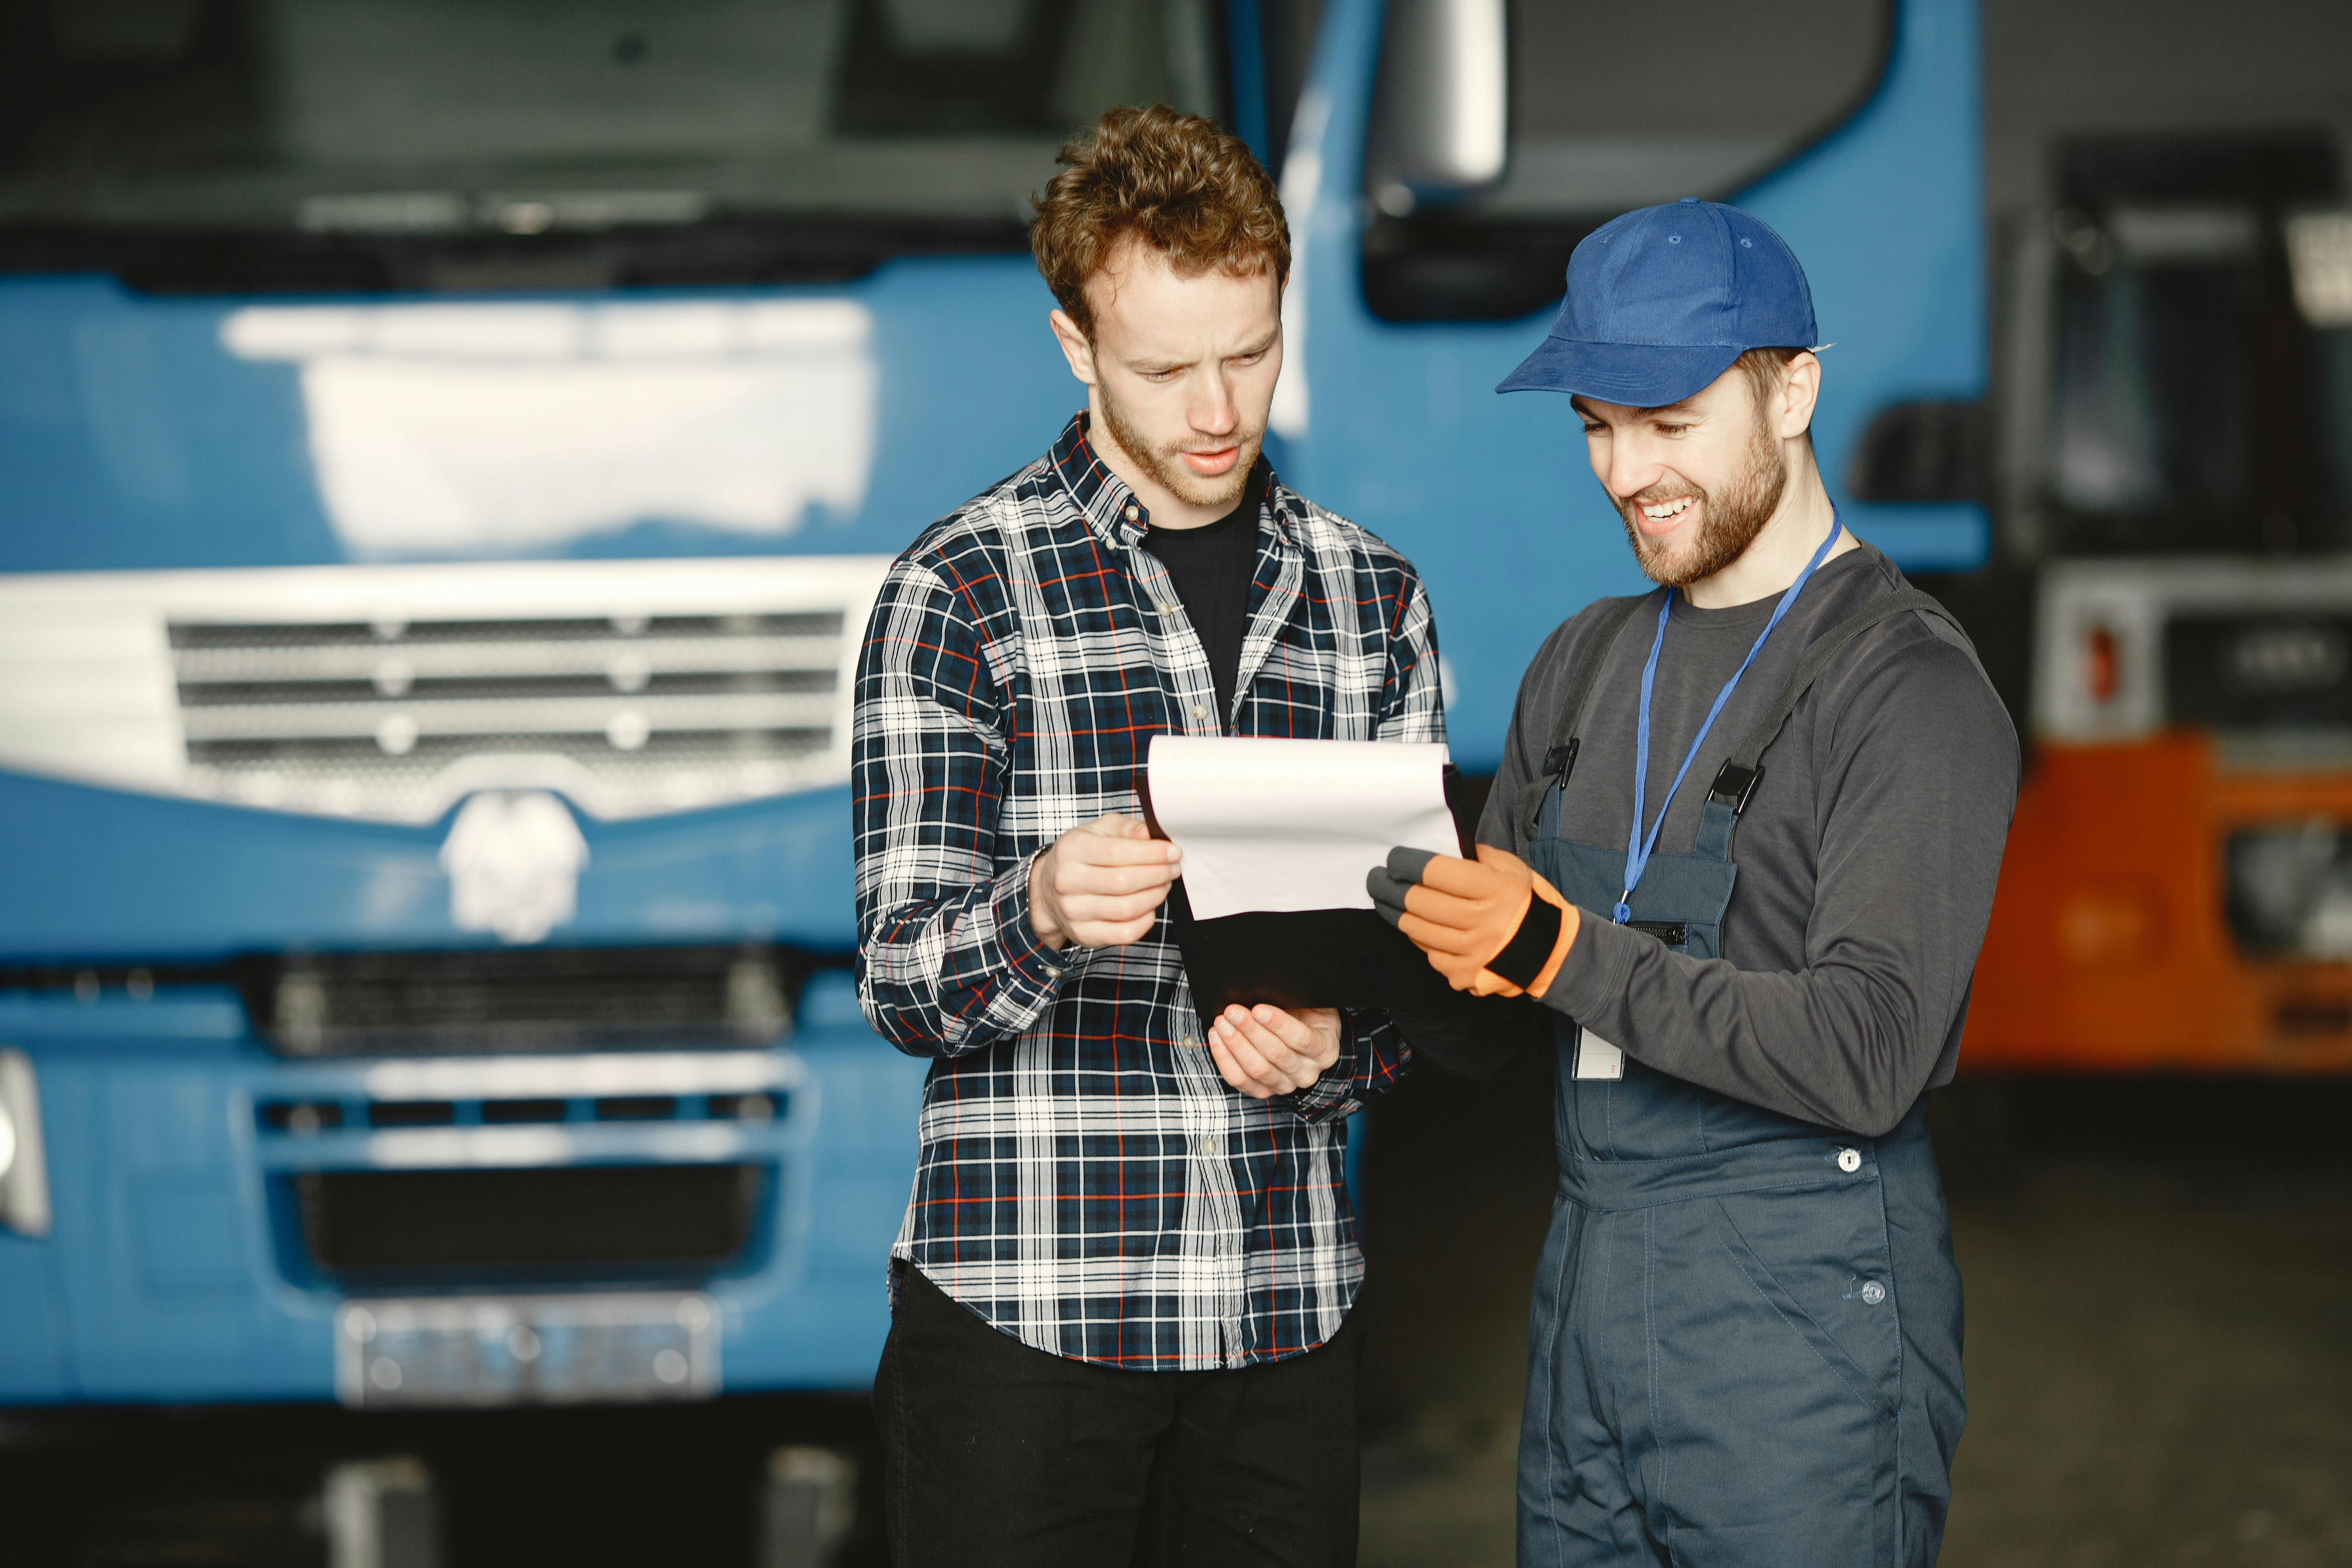 Free Man in Plaid Shirt and Man in Working Clothes Looking at the Papers Stock Photo